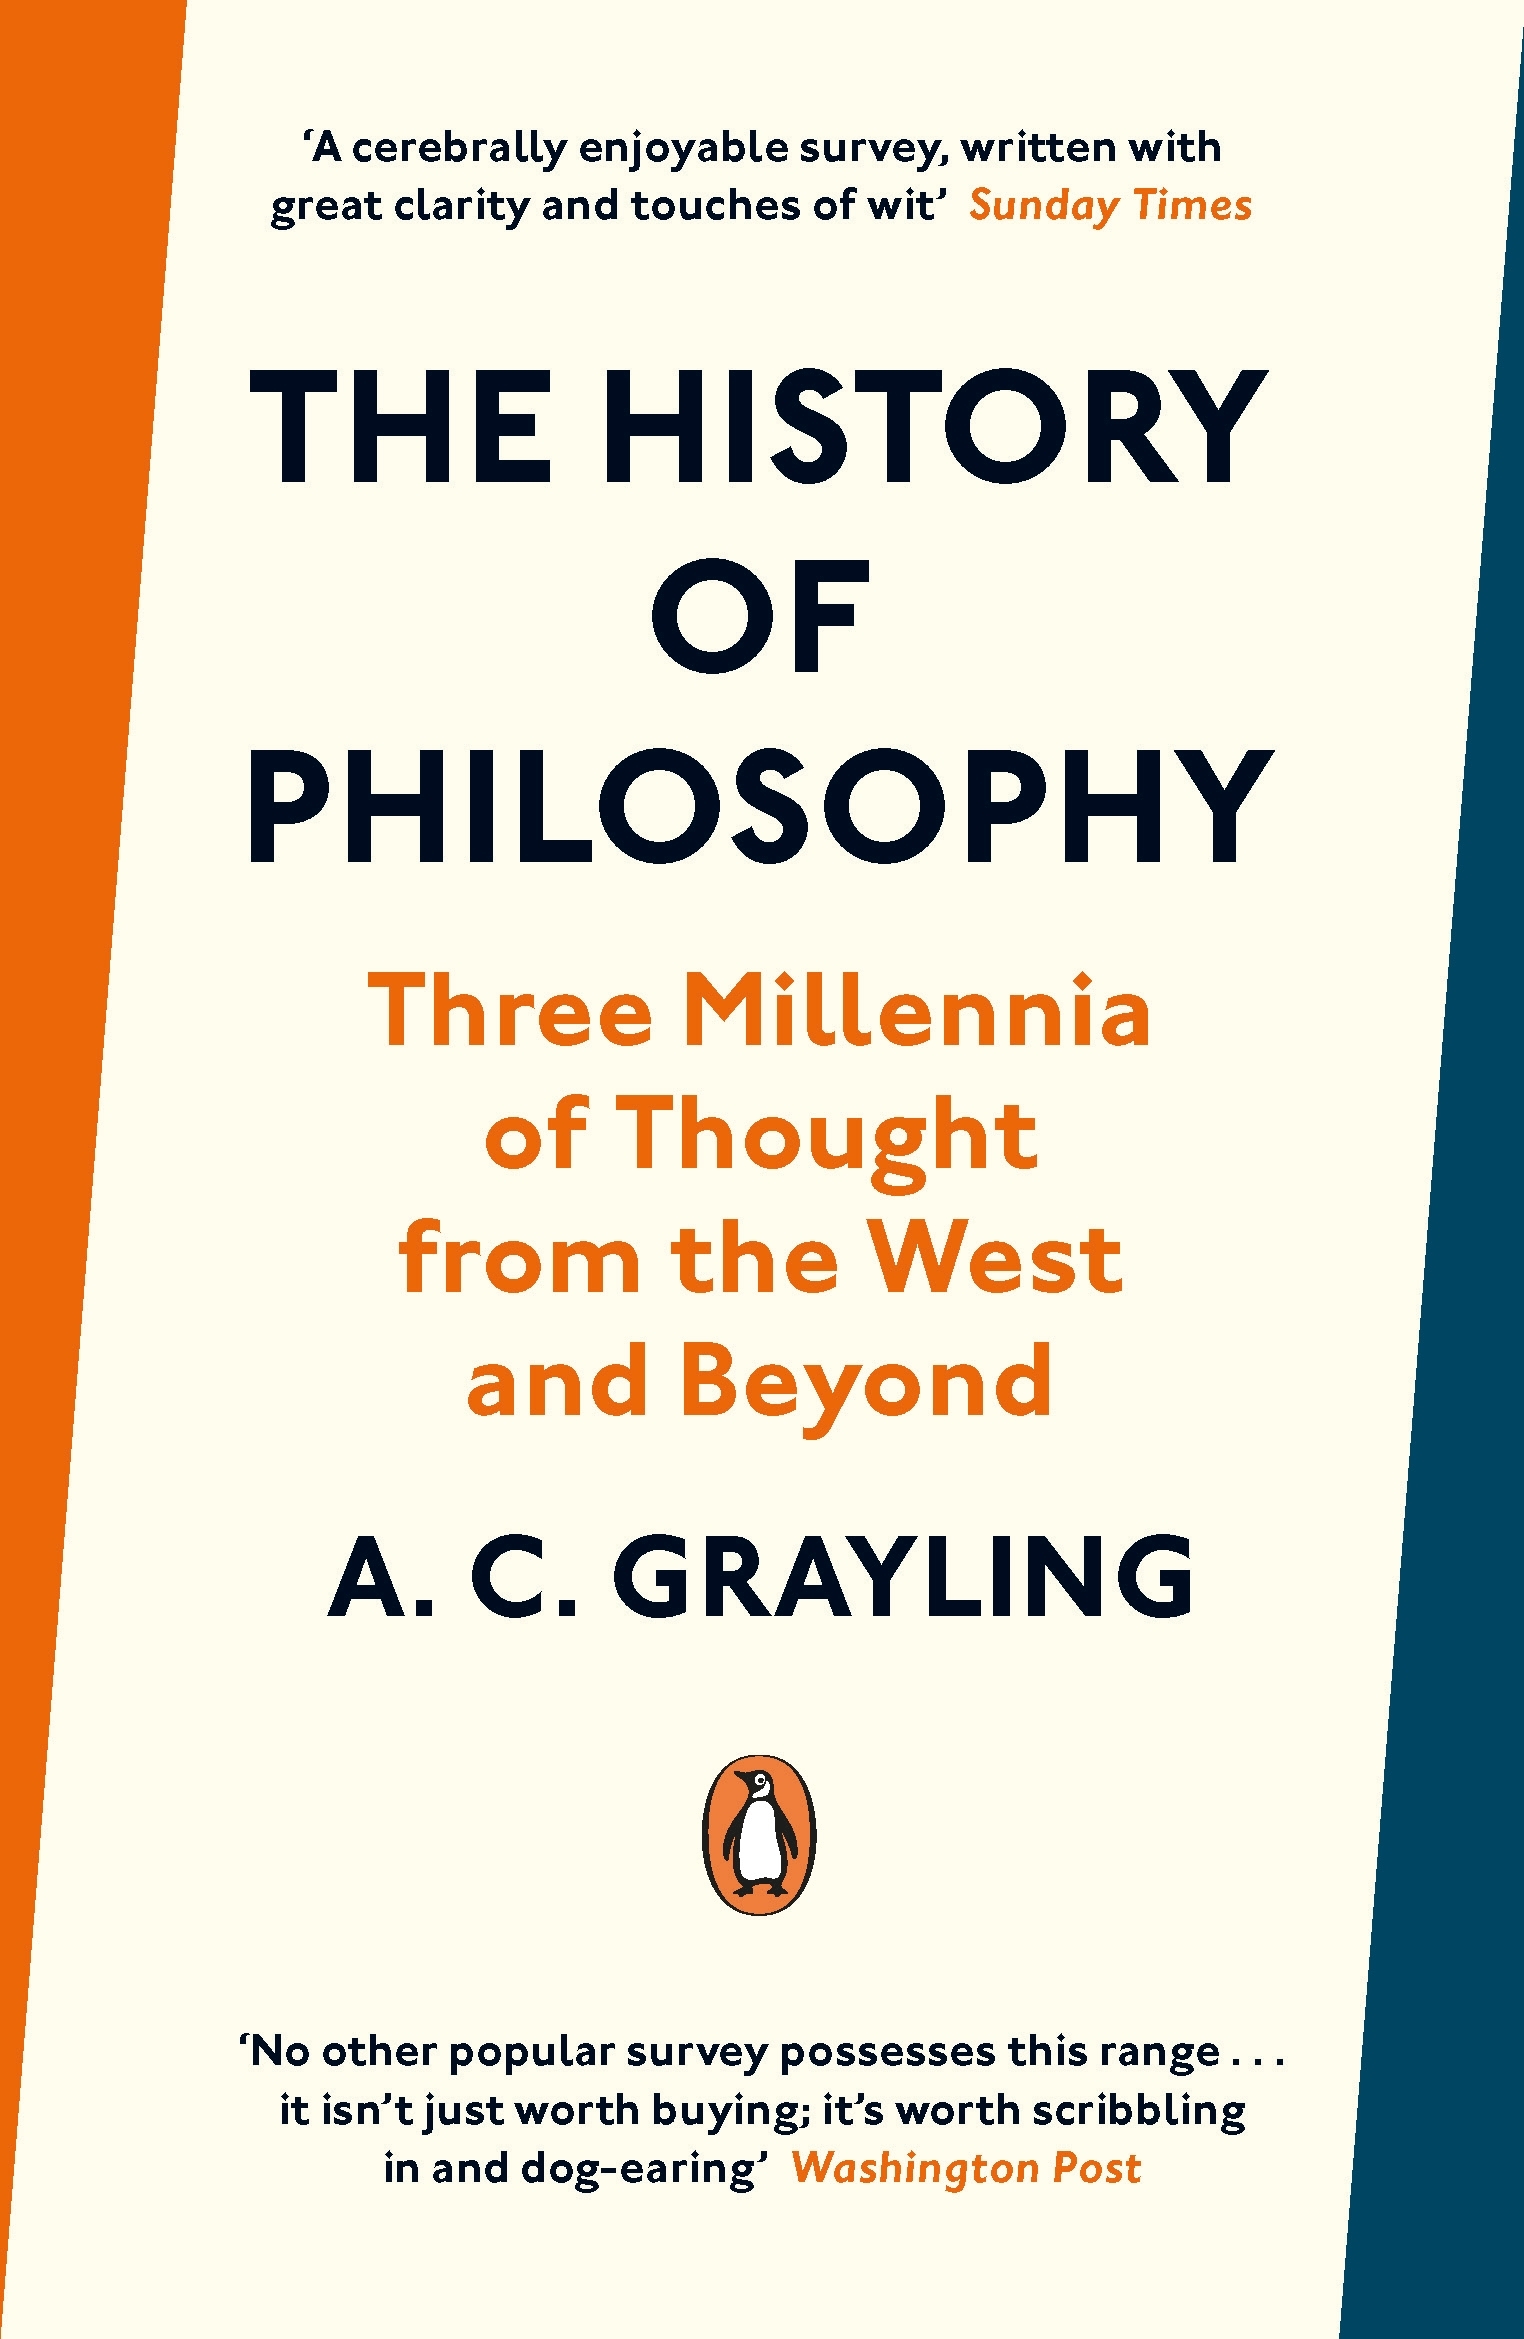 The History of Philosophy by A. C. Grayling - 9780241304549